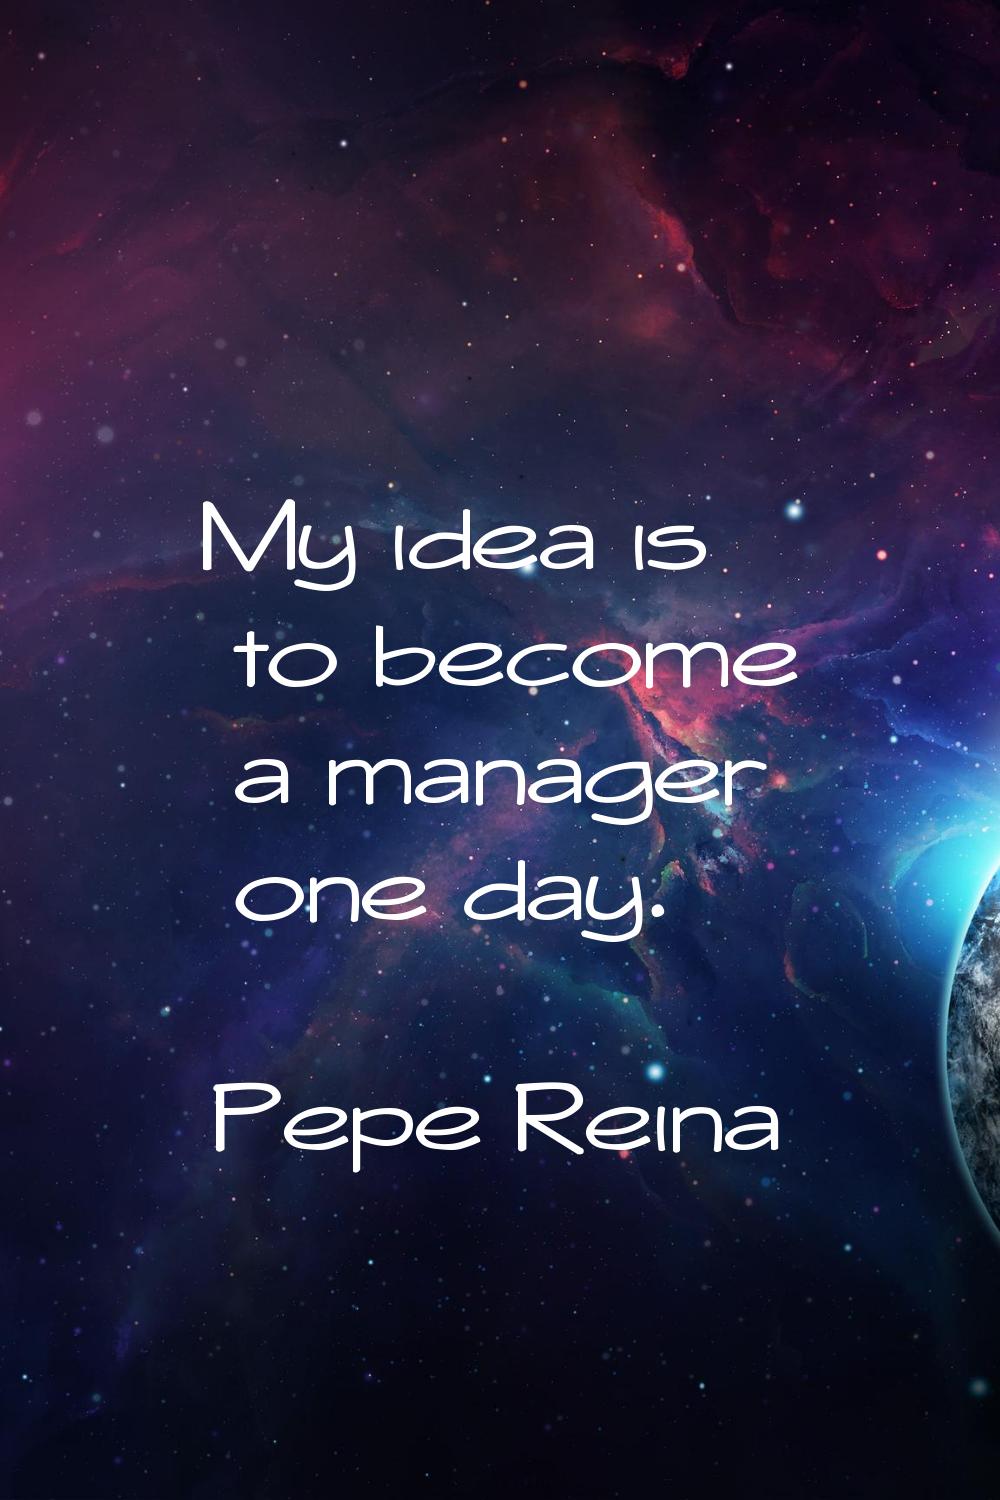 My idea is to become a manager one day.